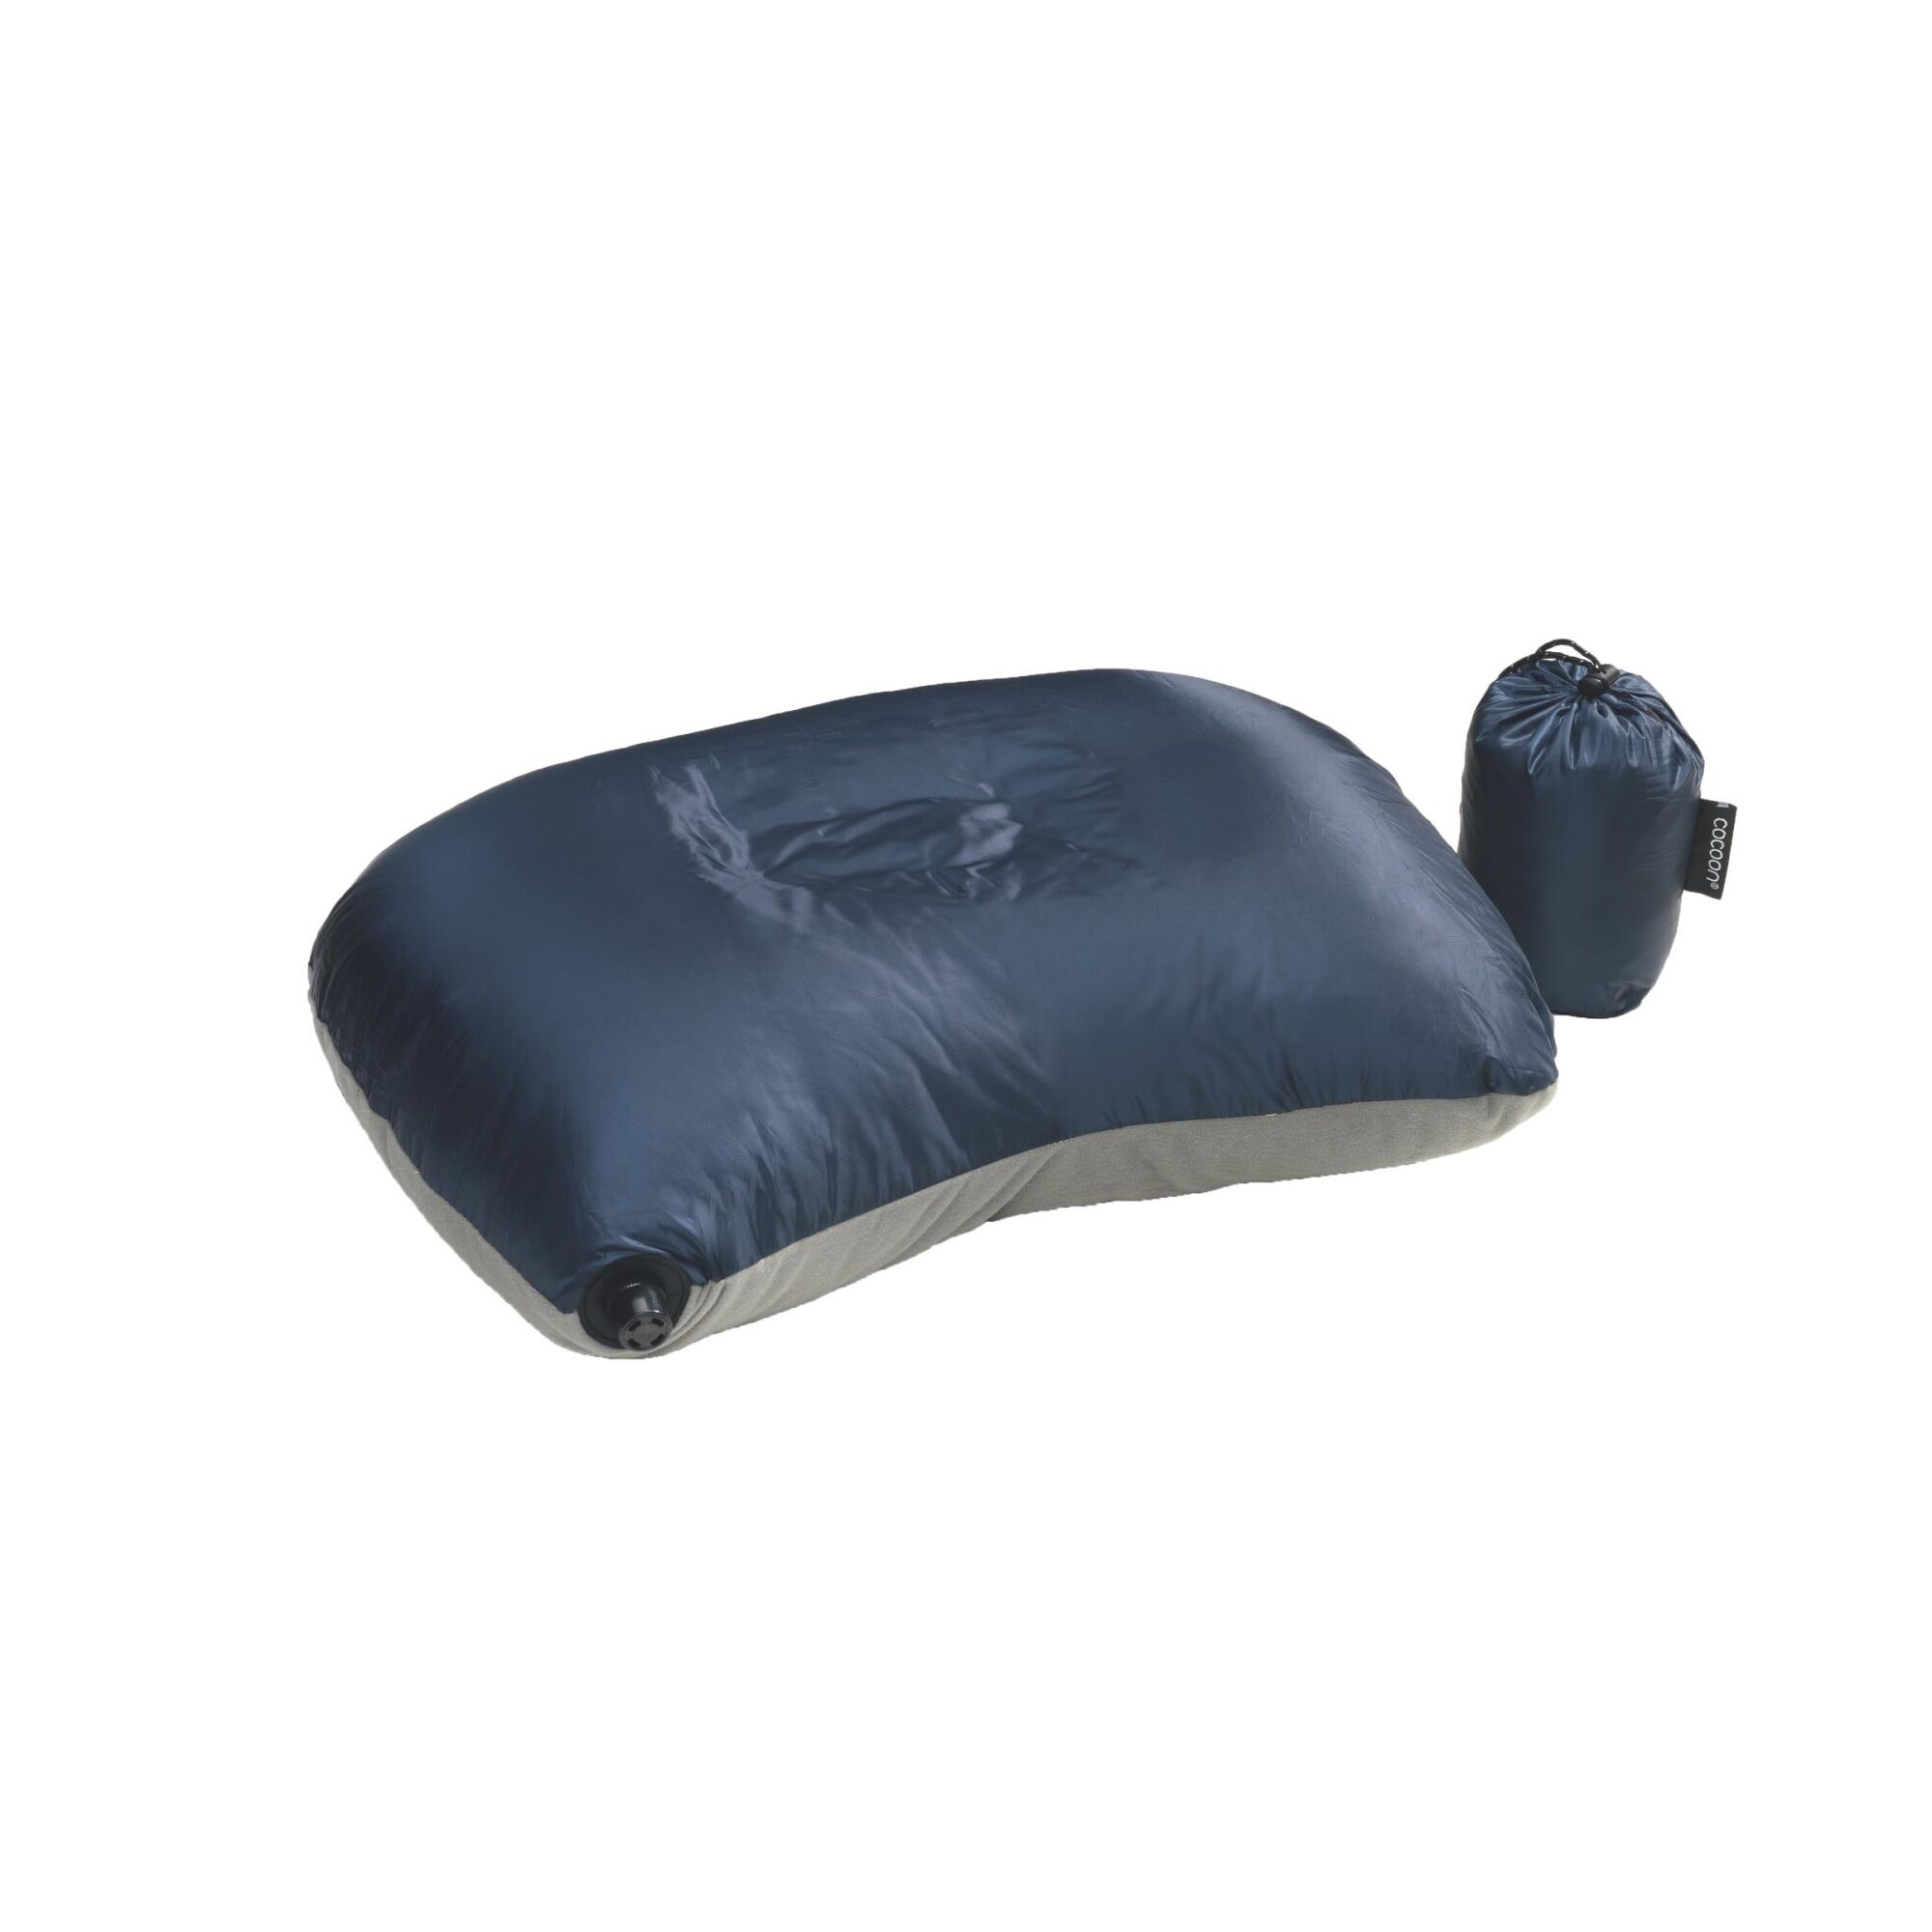 Cocoon Air-Core Down Pillow retkityyny